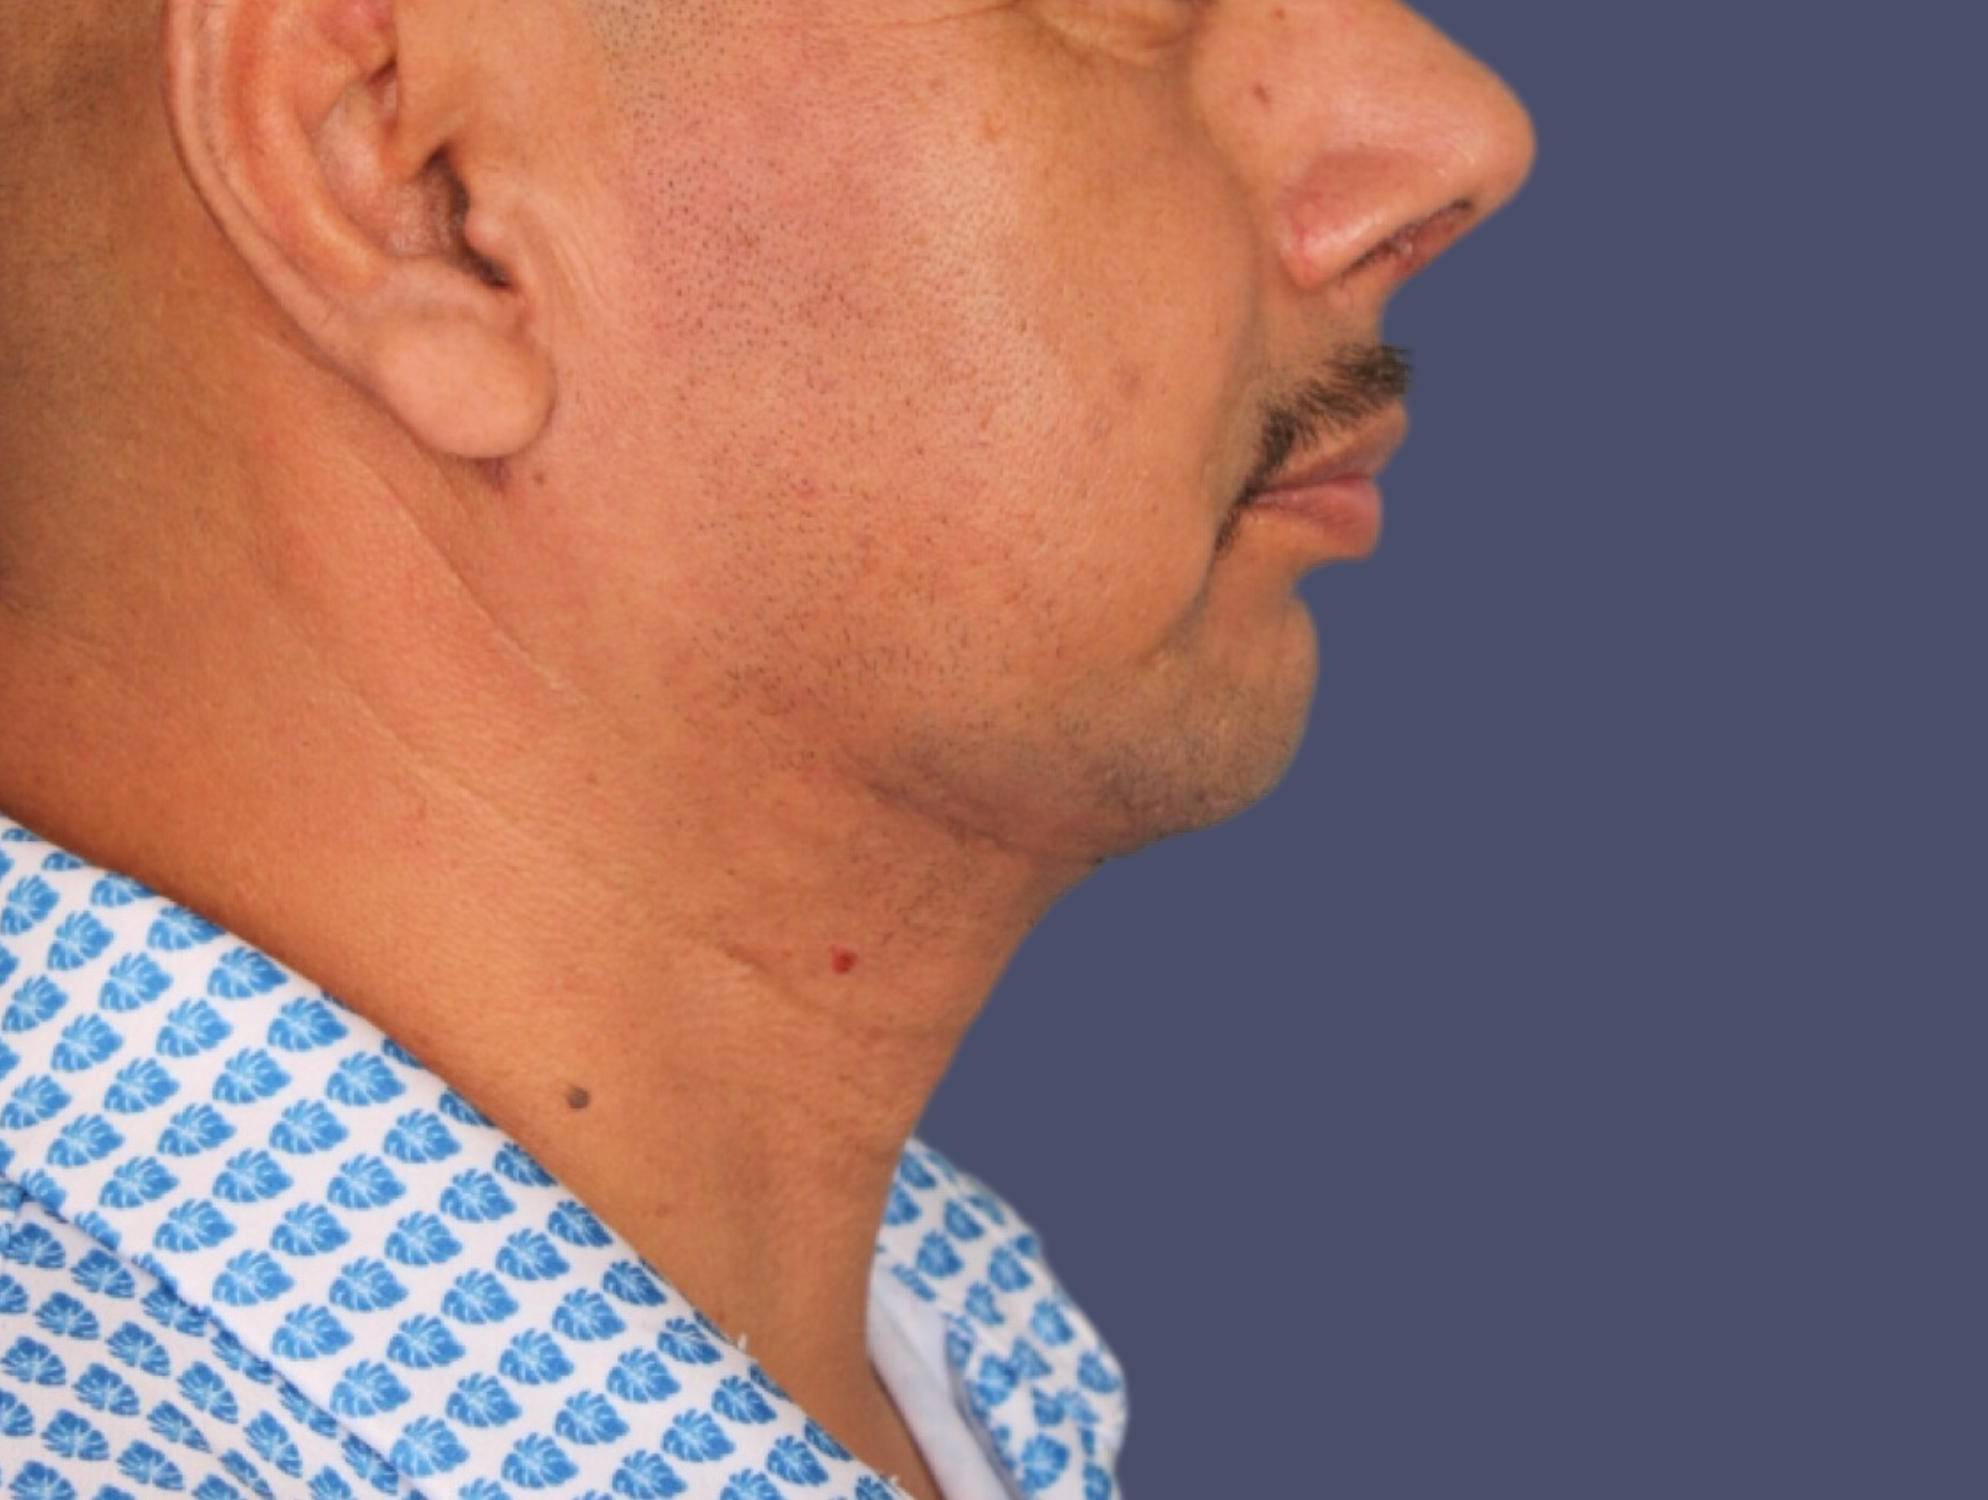 Liposuction 6 - Neck After